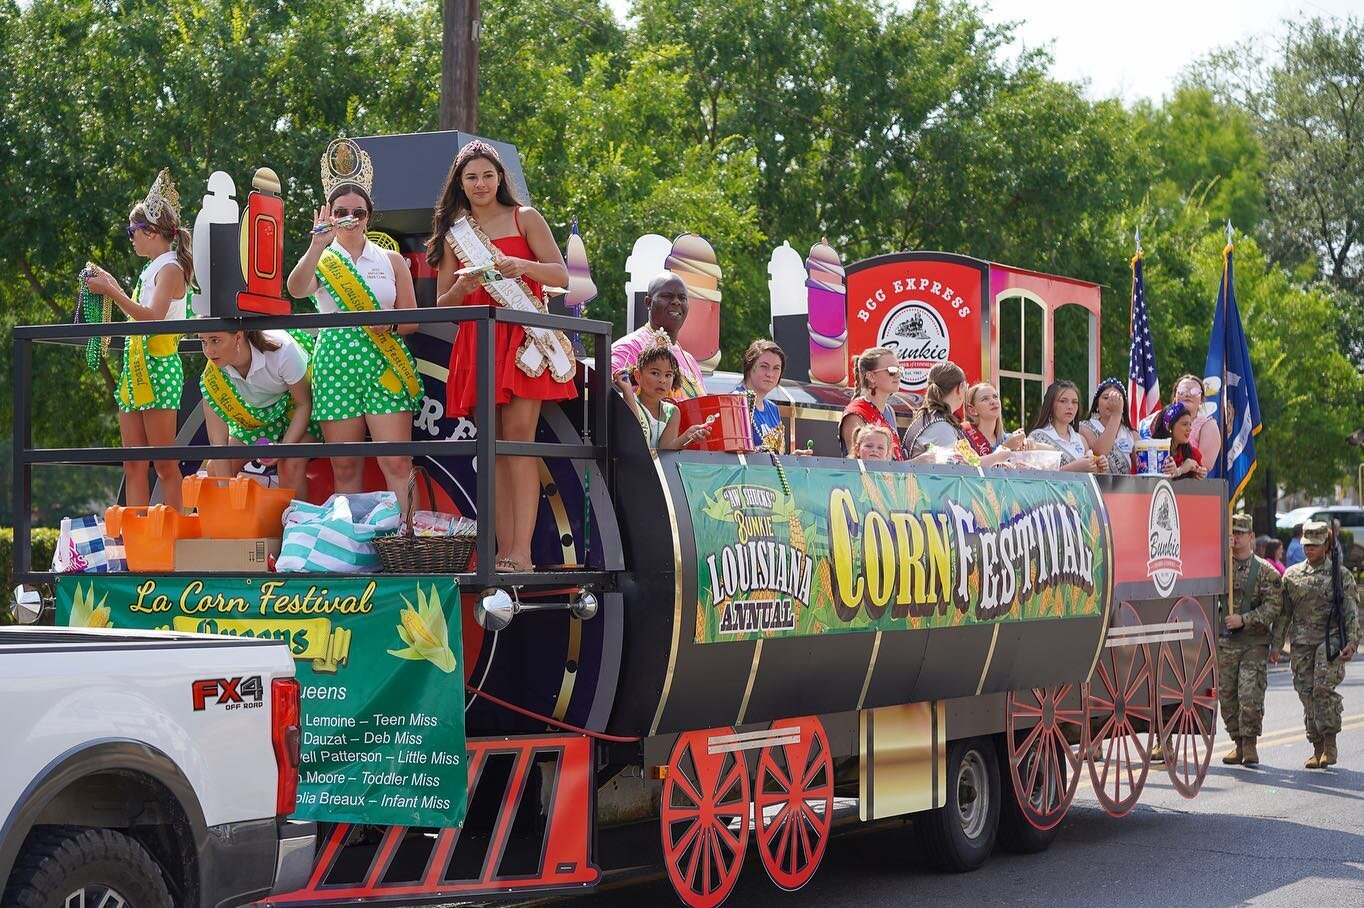 Did you see the new Louisiana Corn Festival &amp; @bunkiechamber float?!? We ❤️ it!!!! Be on the lookout for it in a parade near you!